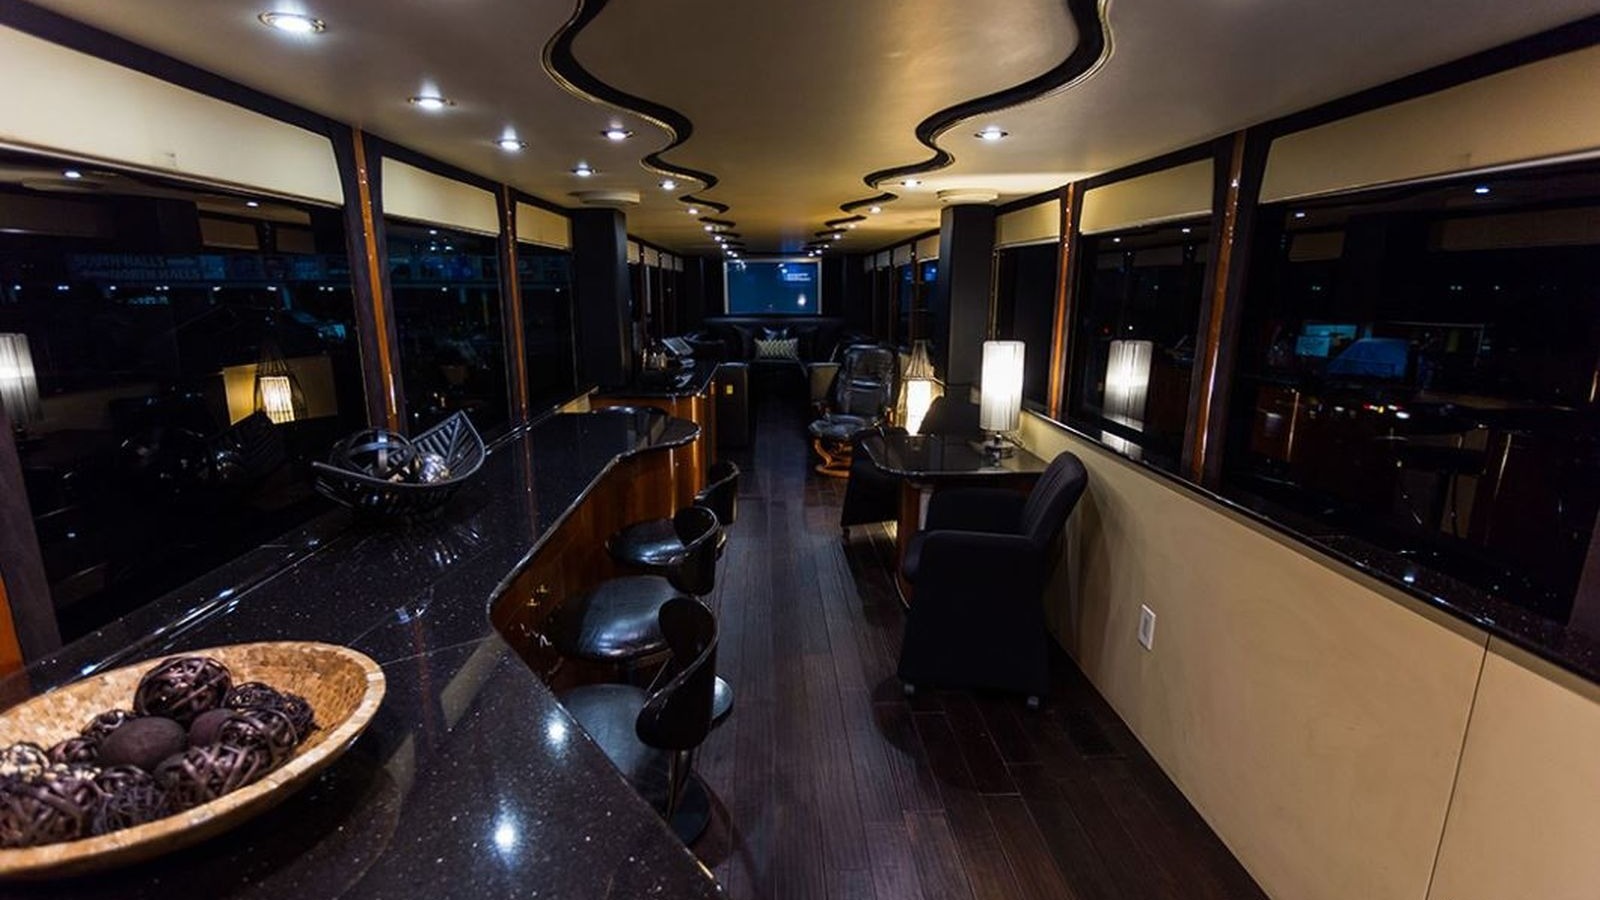 The Most Luxurious Features Of Mariah Carey's 1.8 Million Dollar RV